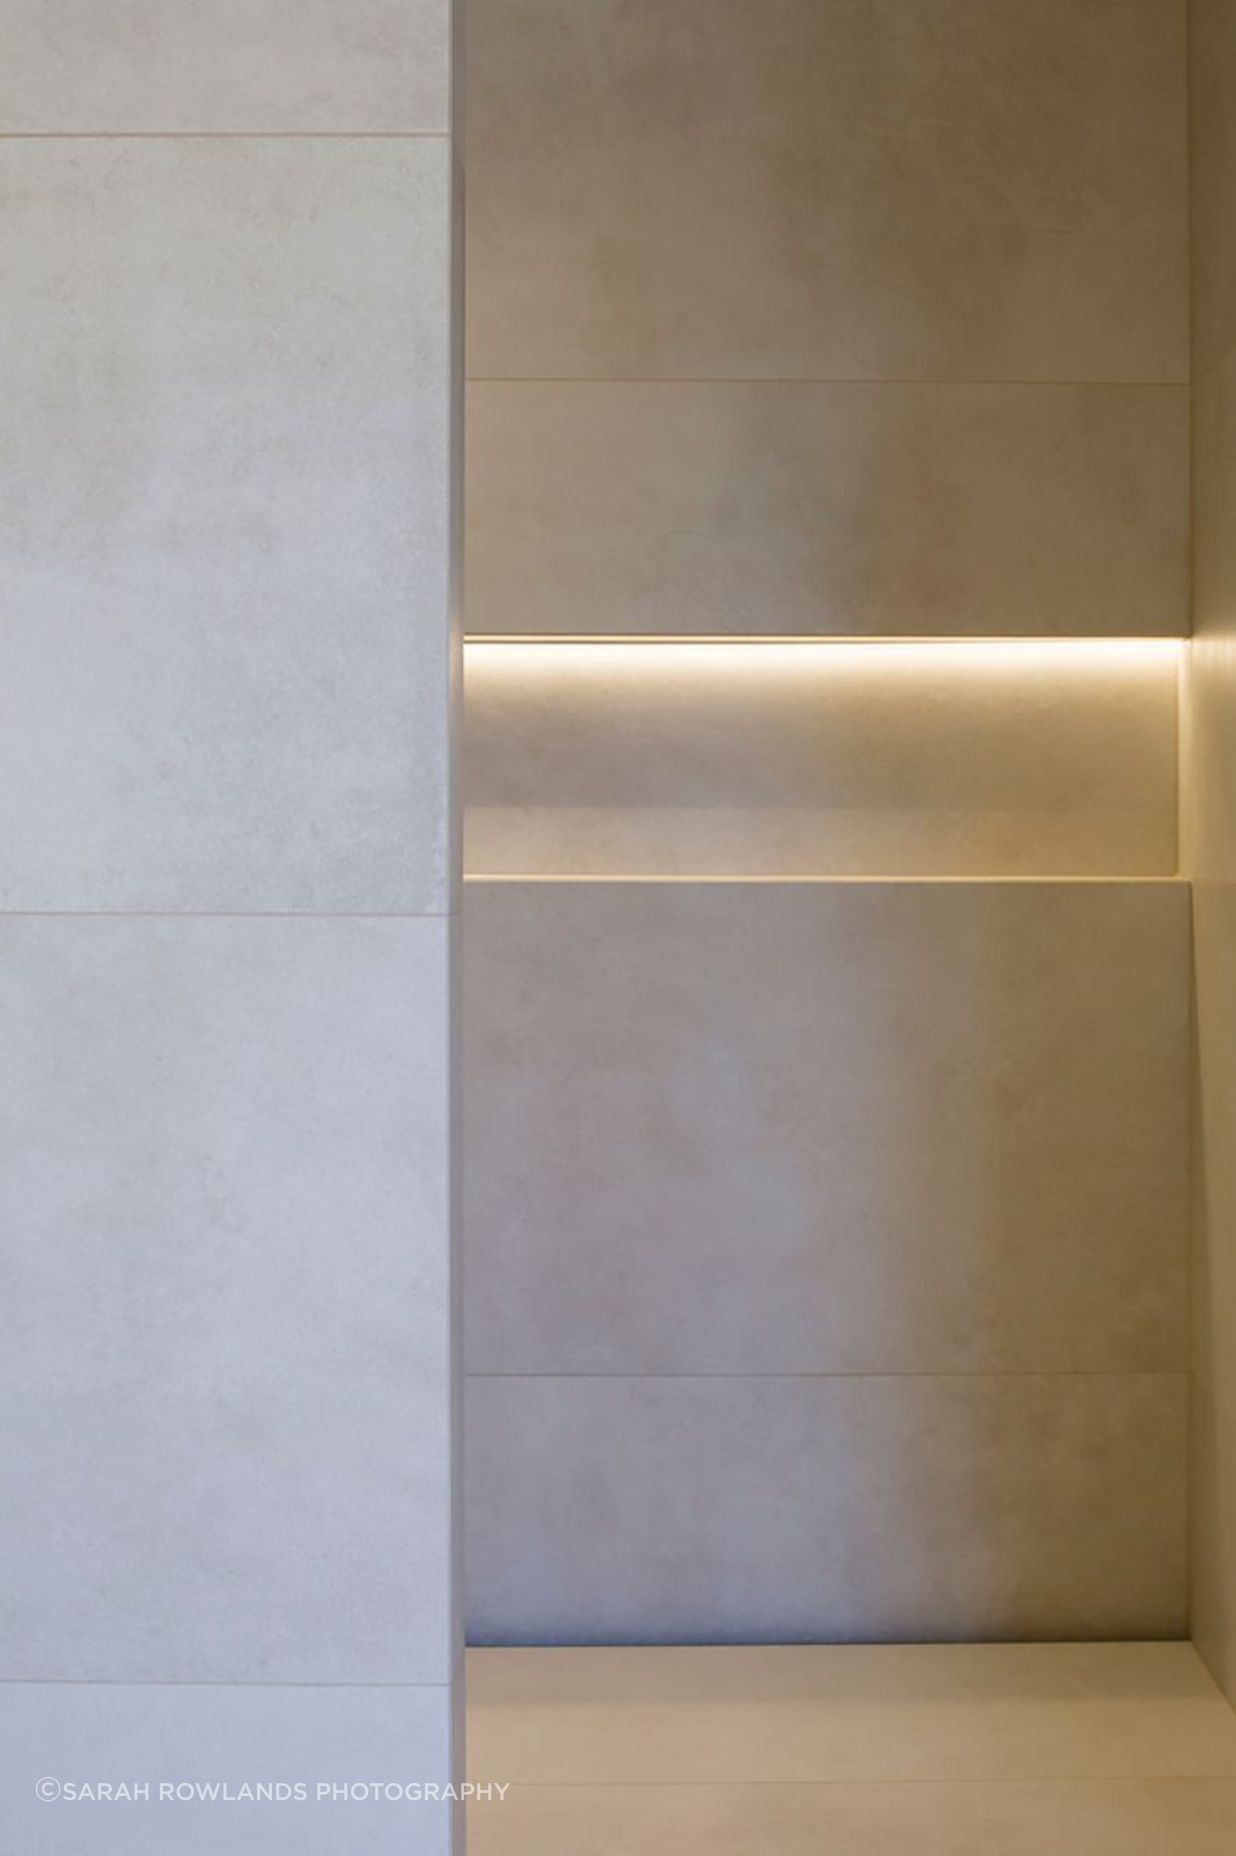 Subtle downlighting emphasises the patterns in the tiling.